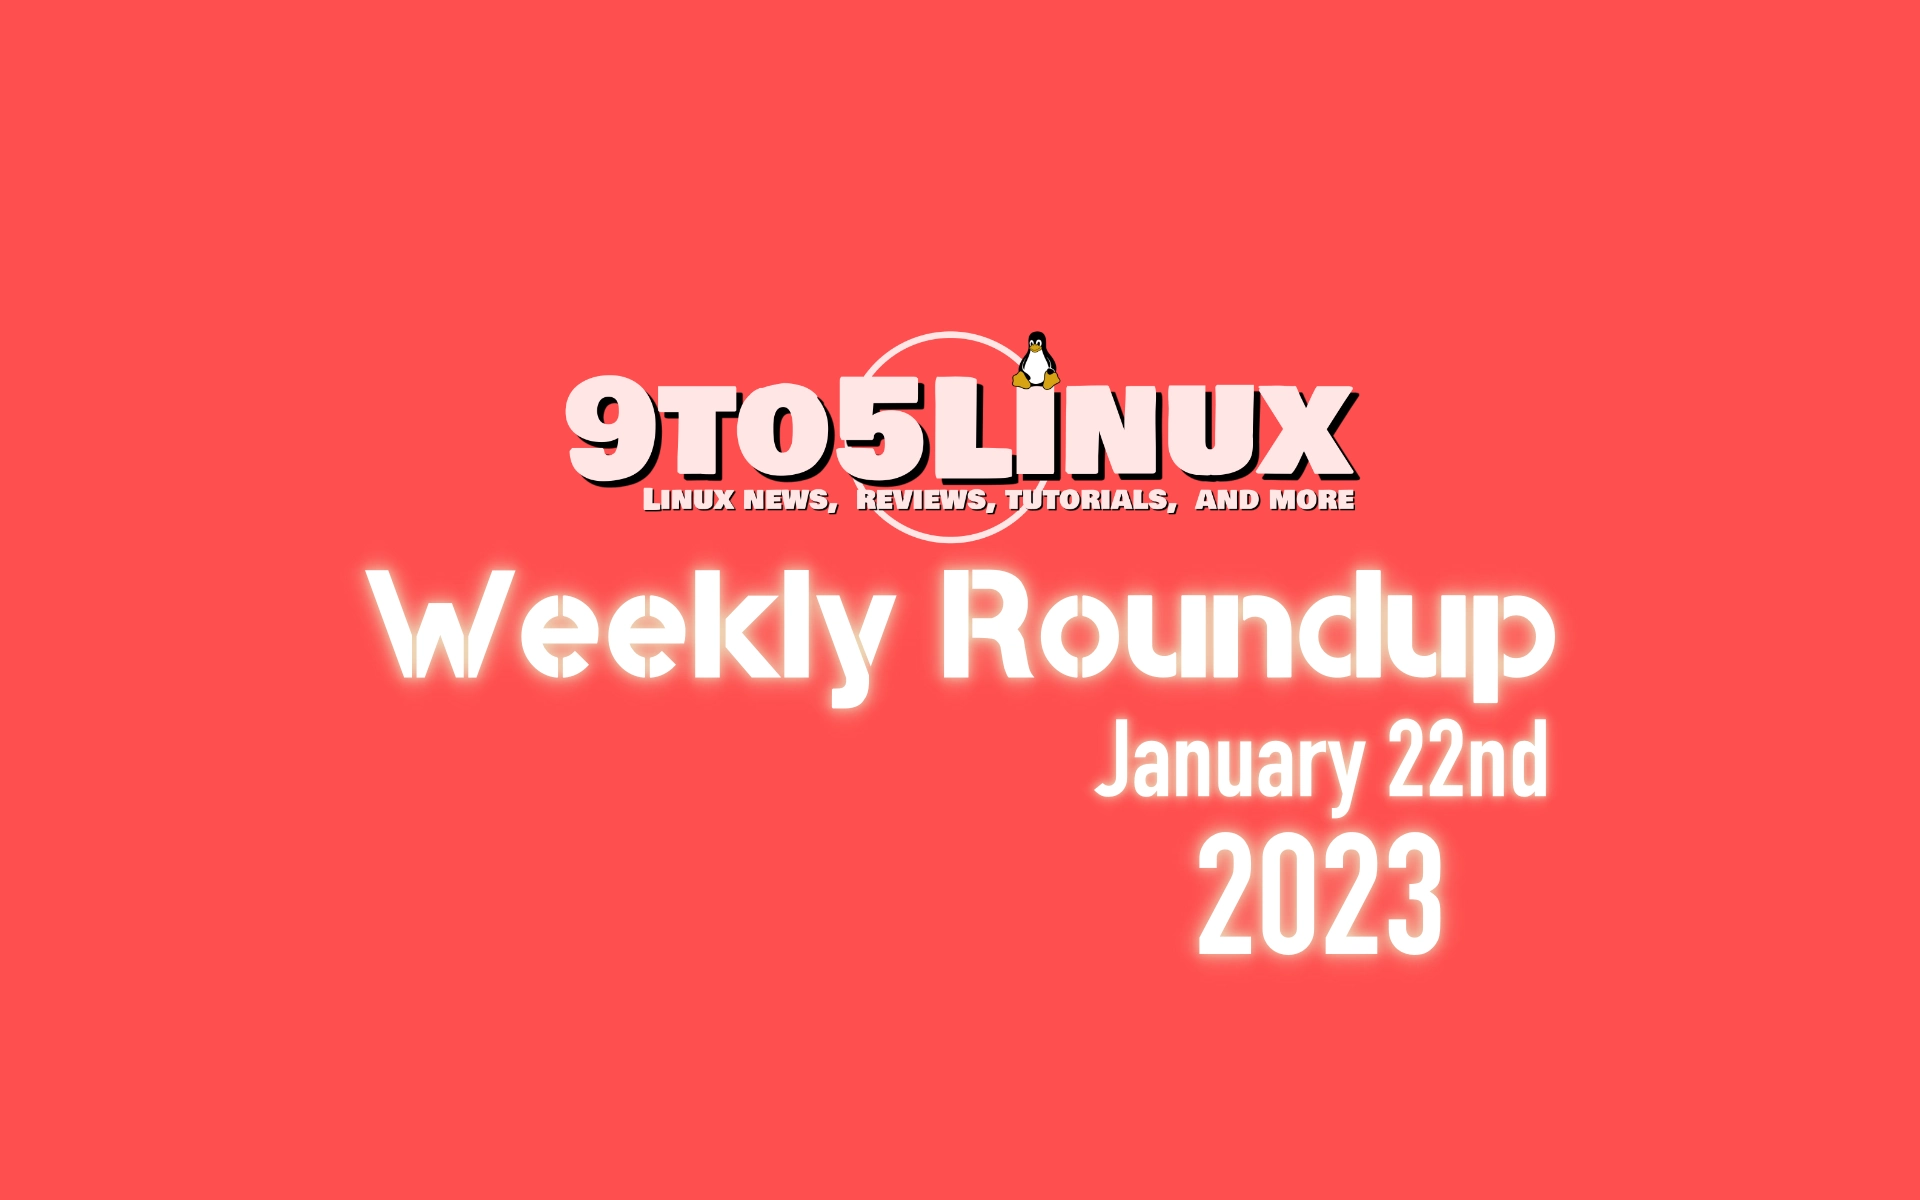 9to5Linux Weekly Roundup: January 22nd, 2023